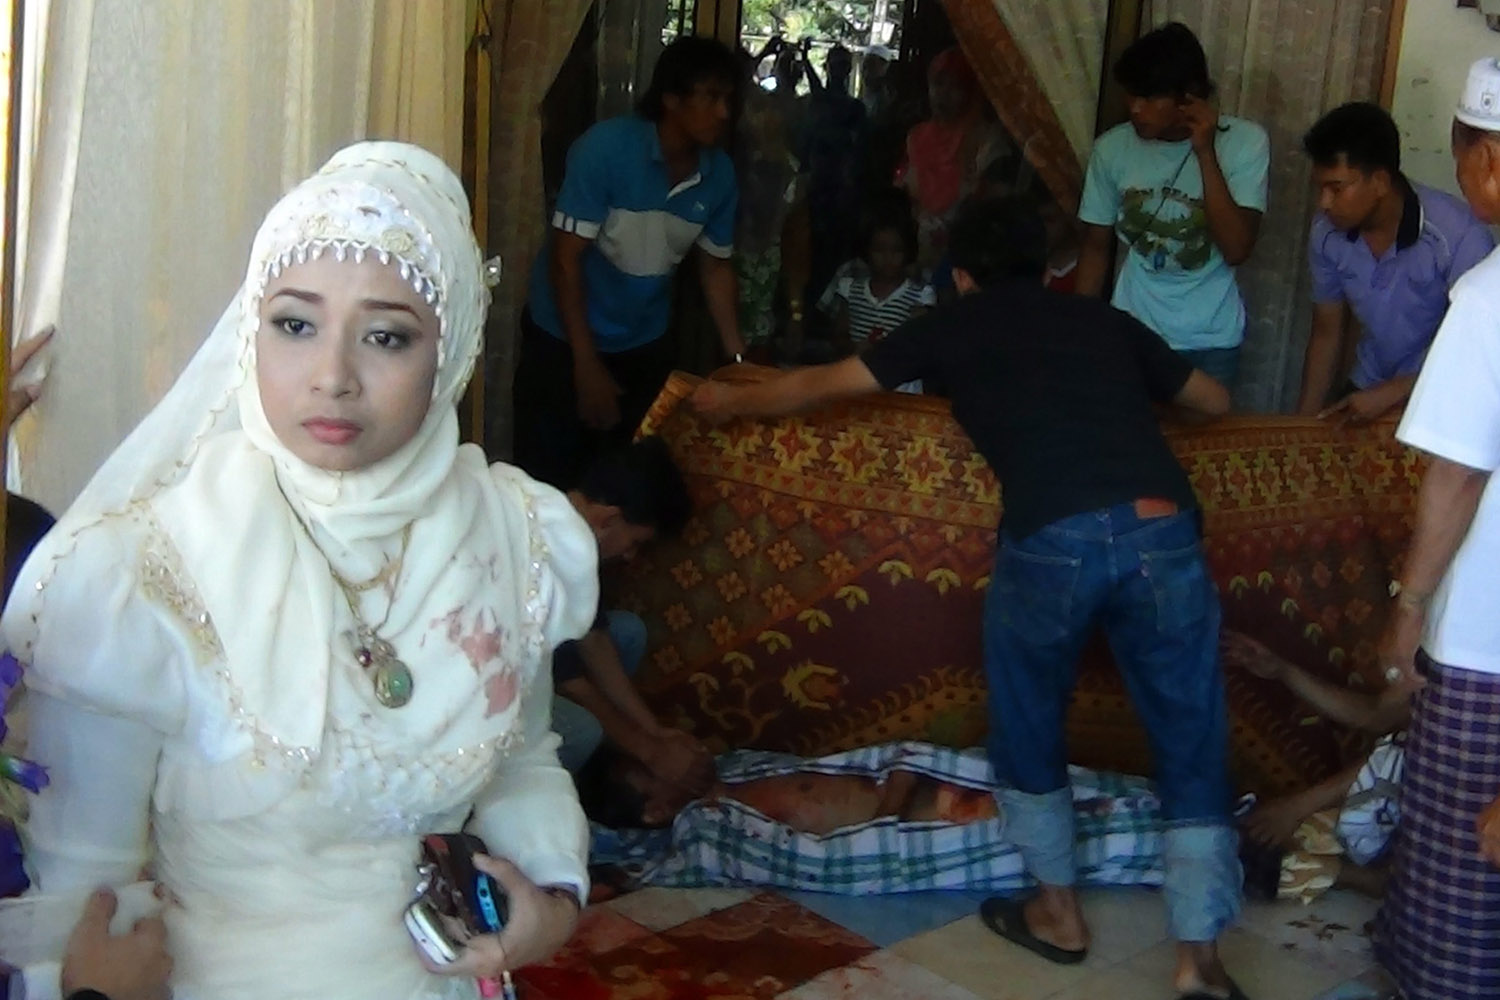 A bridegroom was shot dead during a wedding party in the Muslim majority province of Pattani